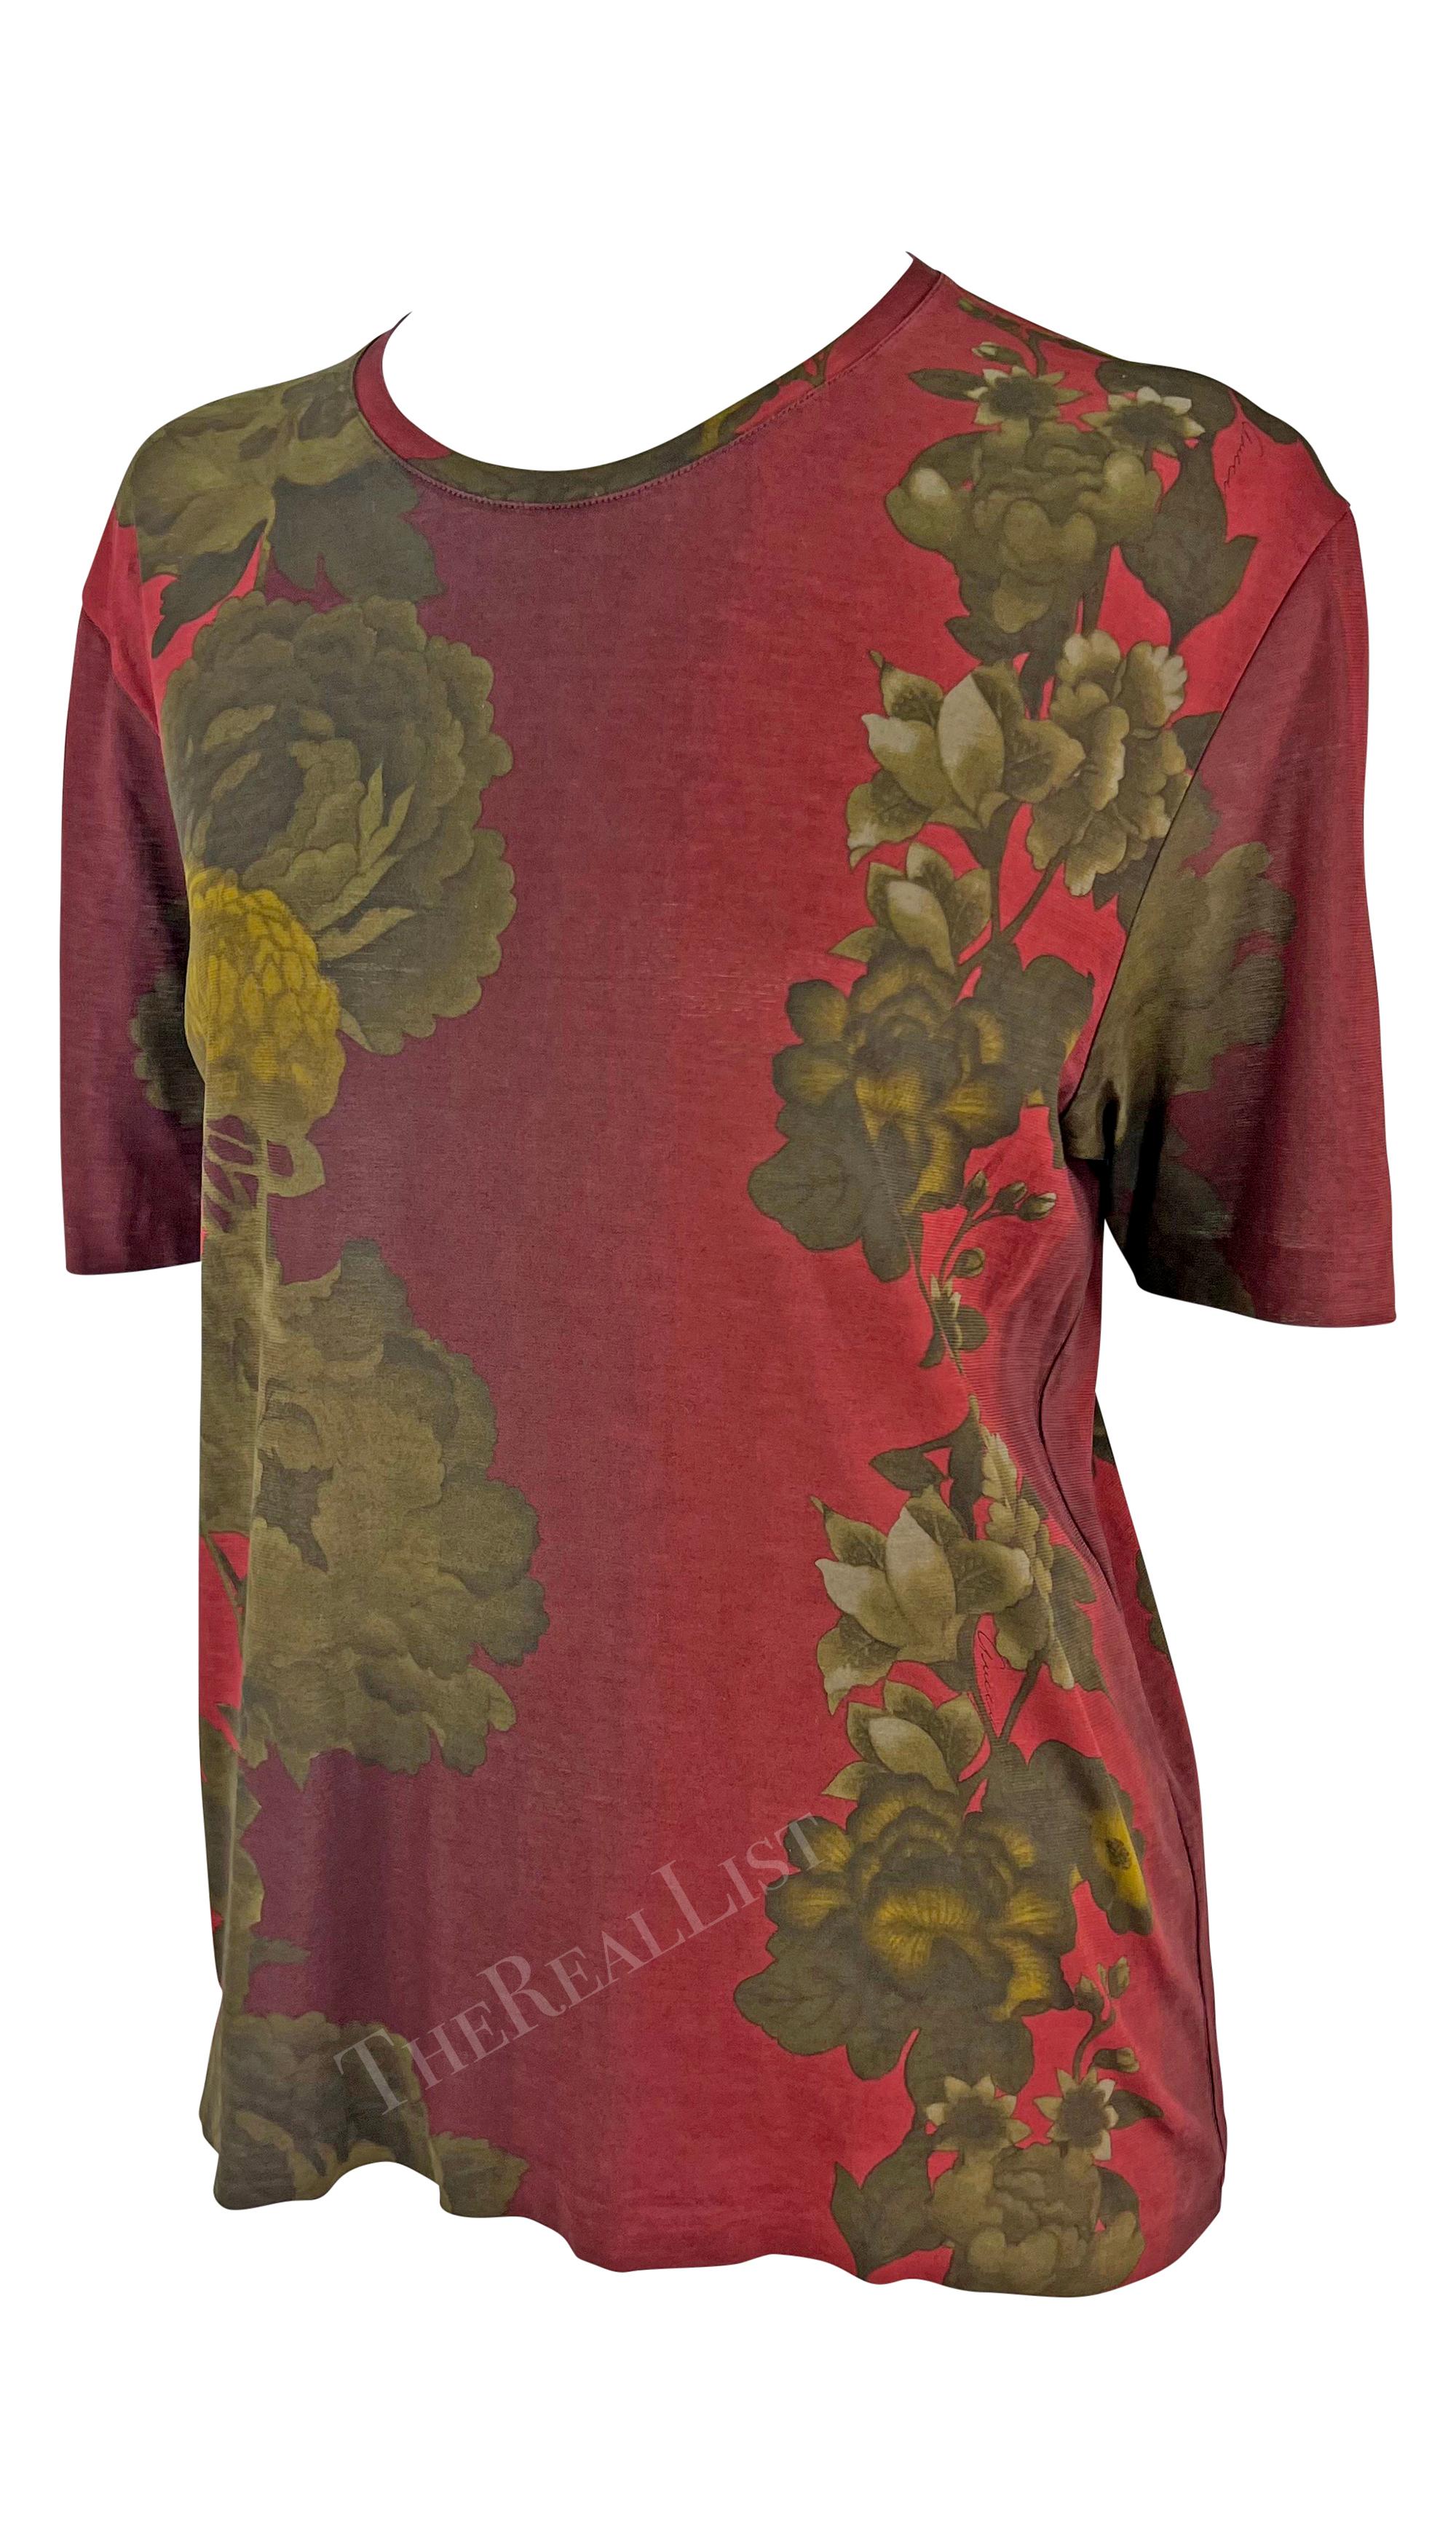 Presenting a fabulous red floral men's Gucci t-shirt, designed by Tom Ford. From the Spring/Summer 1999 collection, this ombre red t-shirt is covered in a monochromatic floral print. 

Approximate measurements:
Size - L
Shoulder to hem: 23